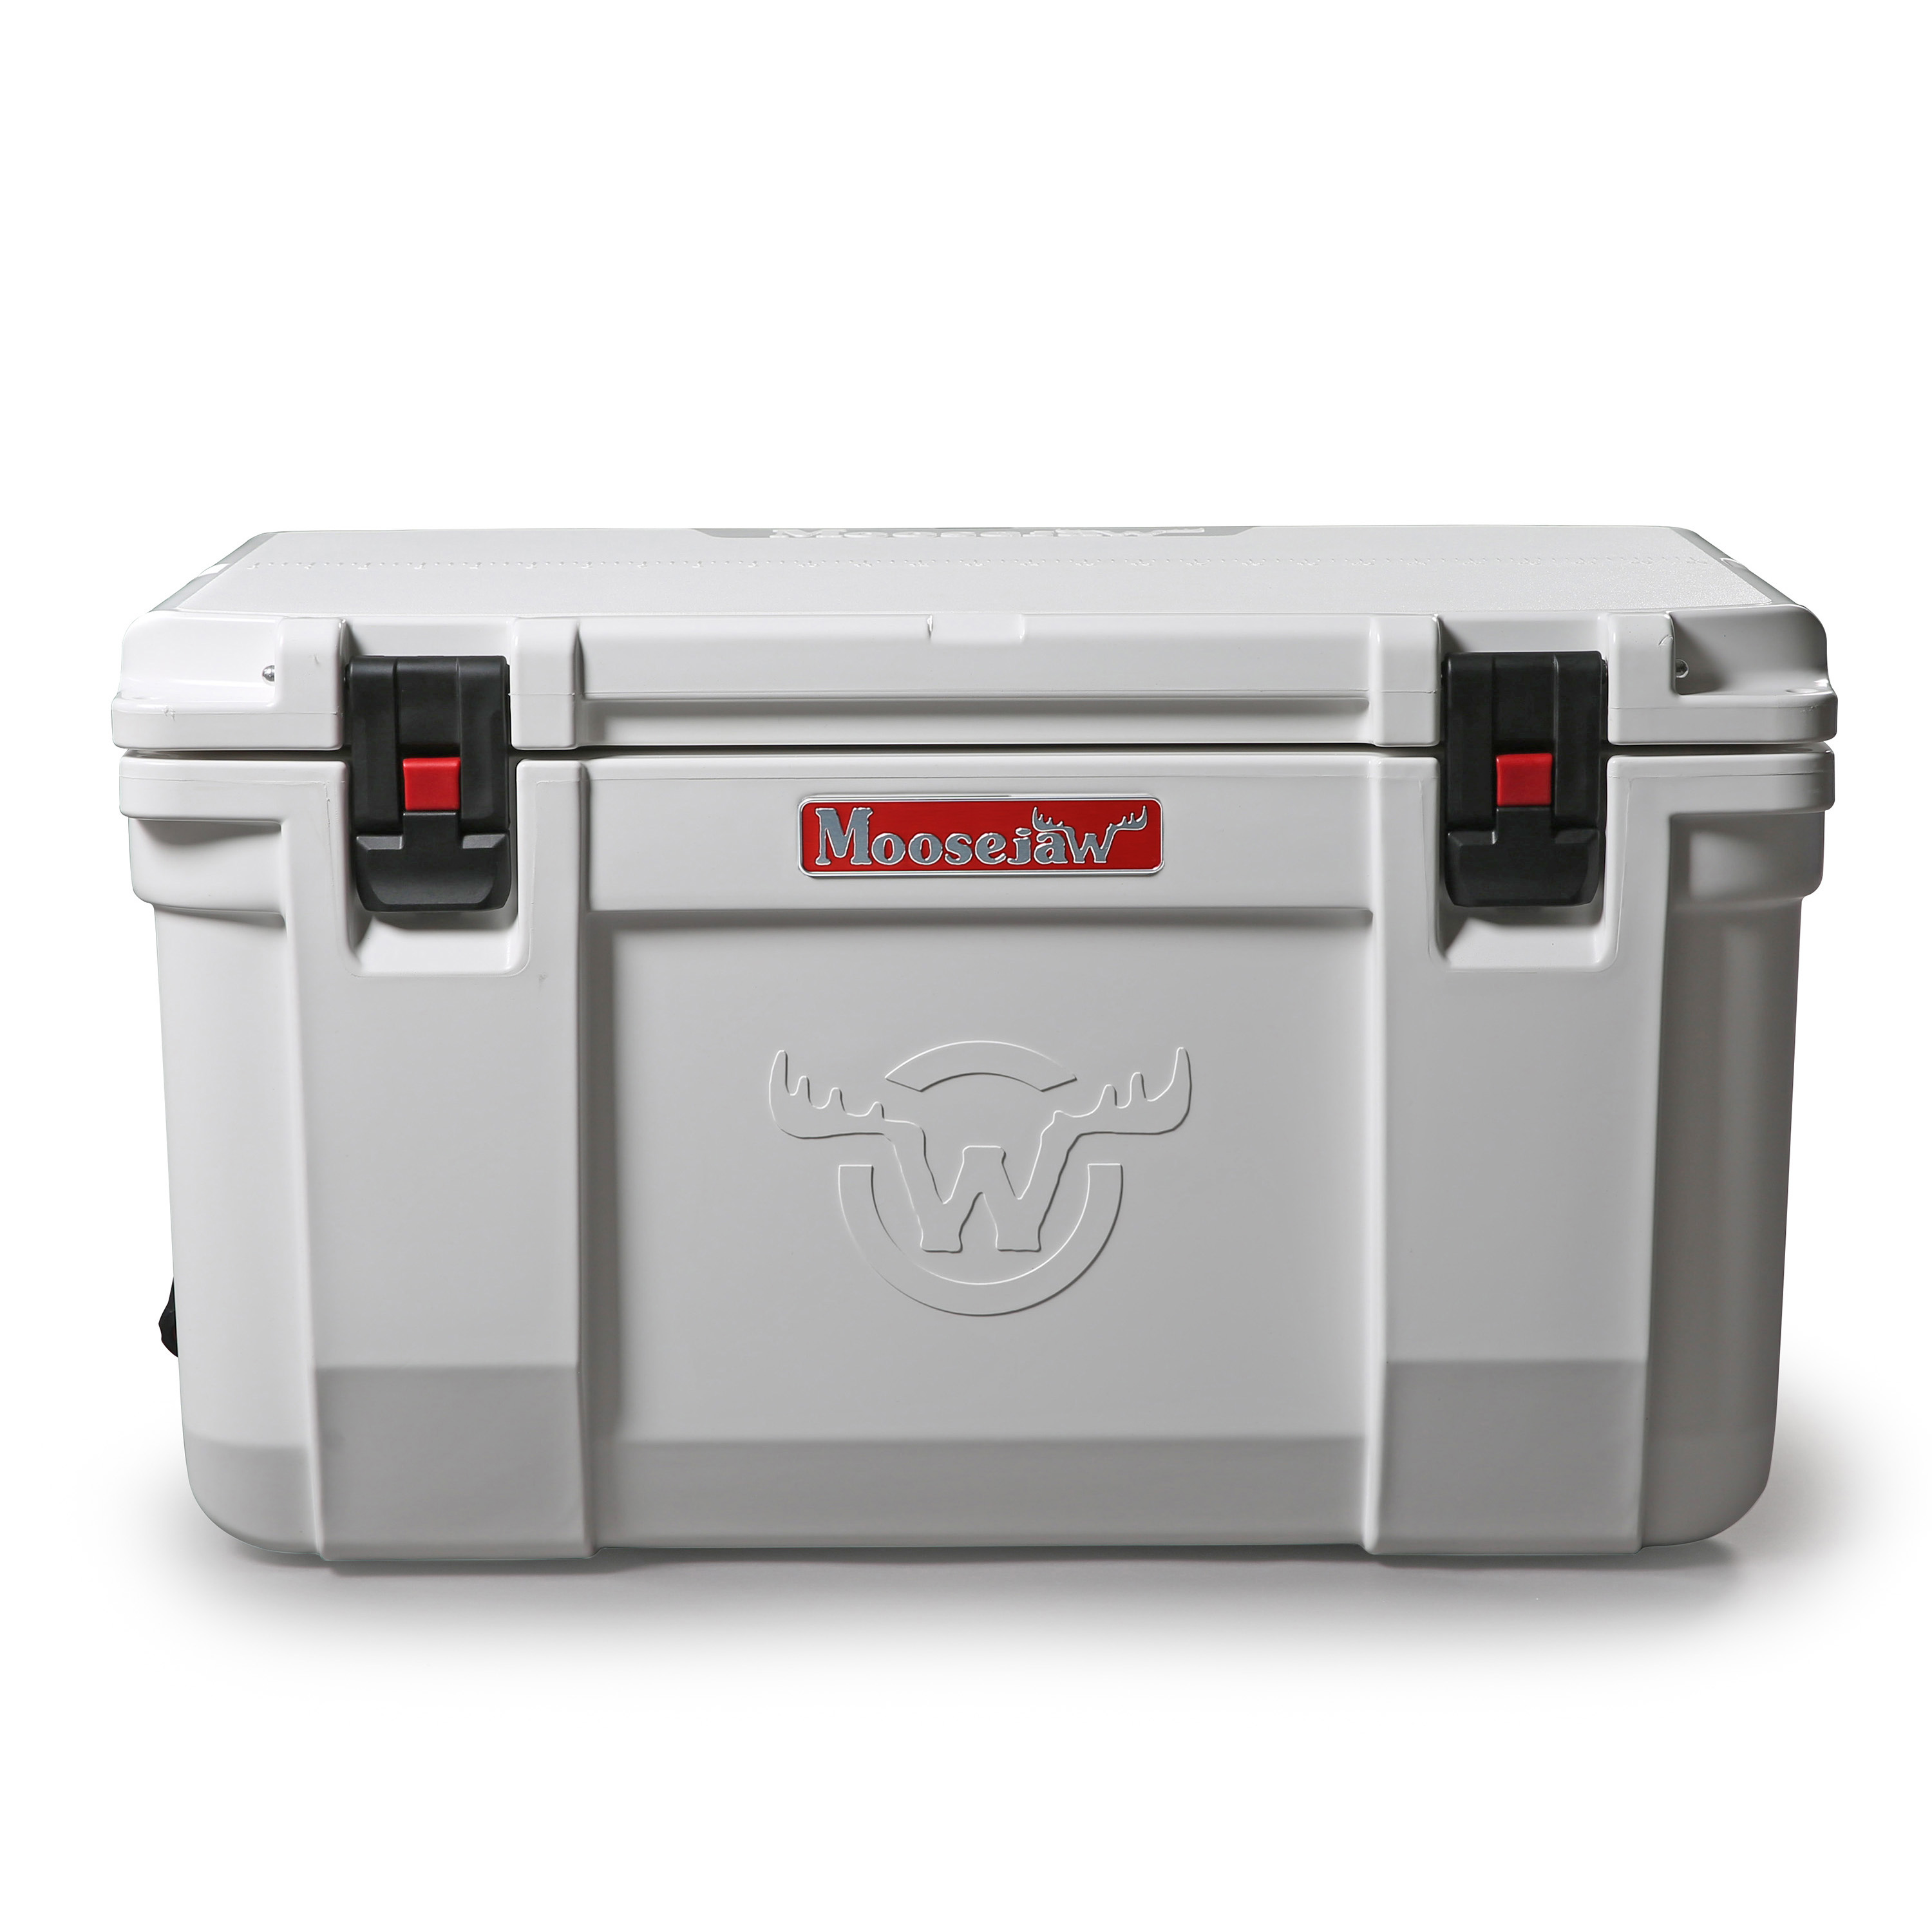 Moosejaw 50 Quart Ice Fort Hard Cooler with Microban, Snow - image 1 of 12